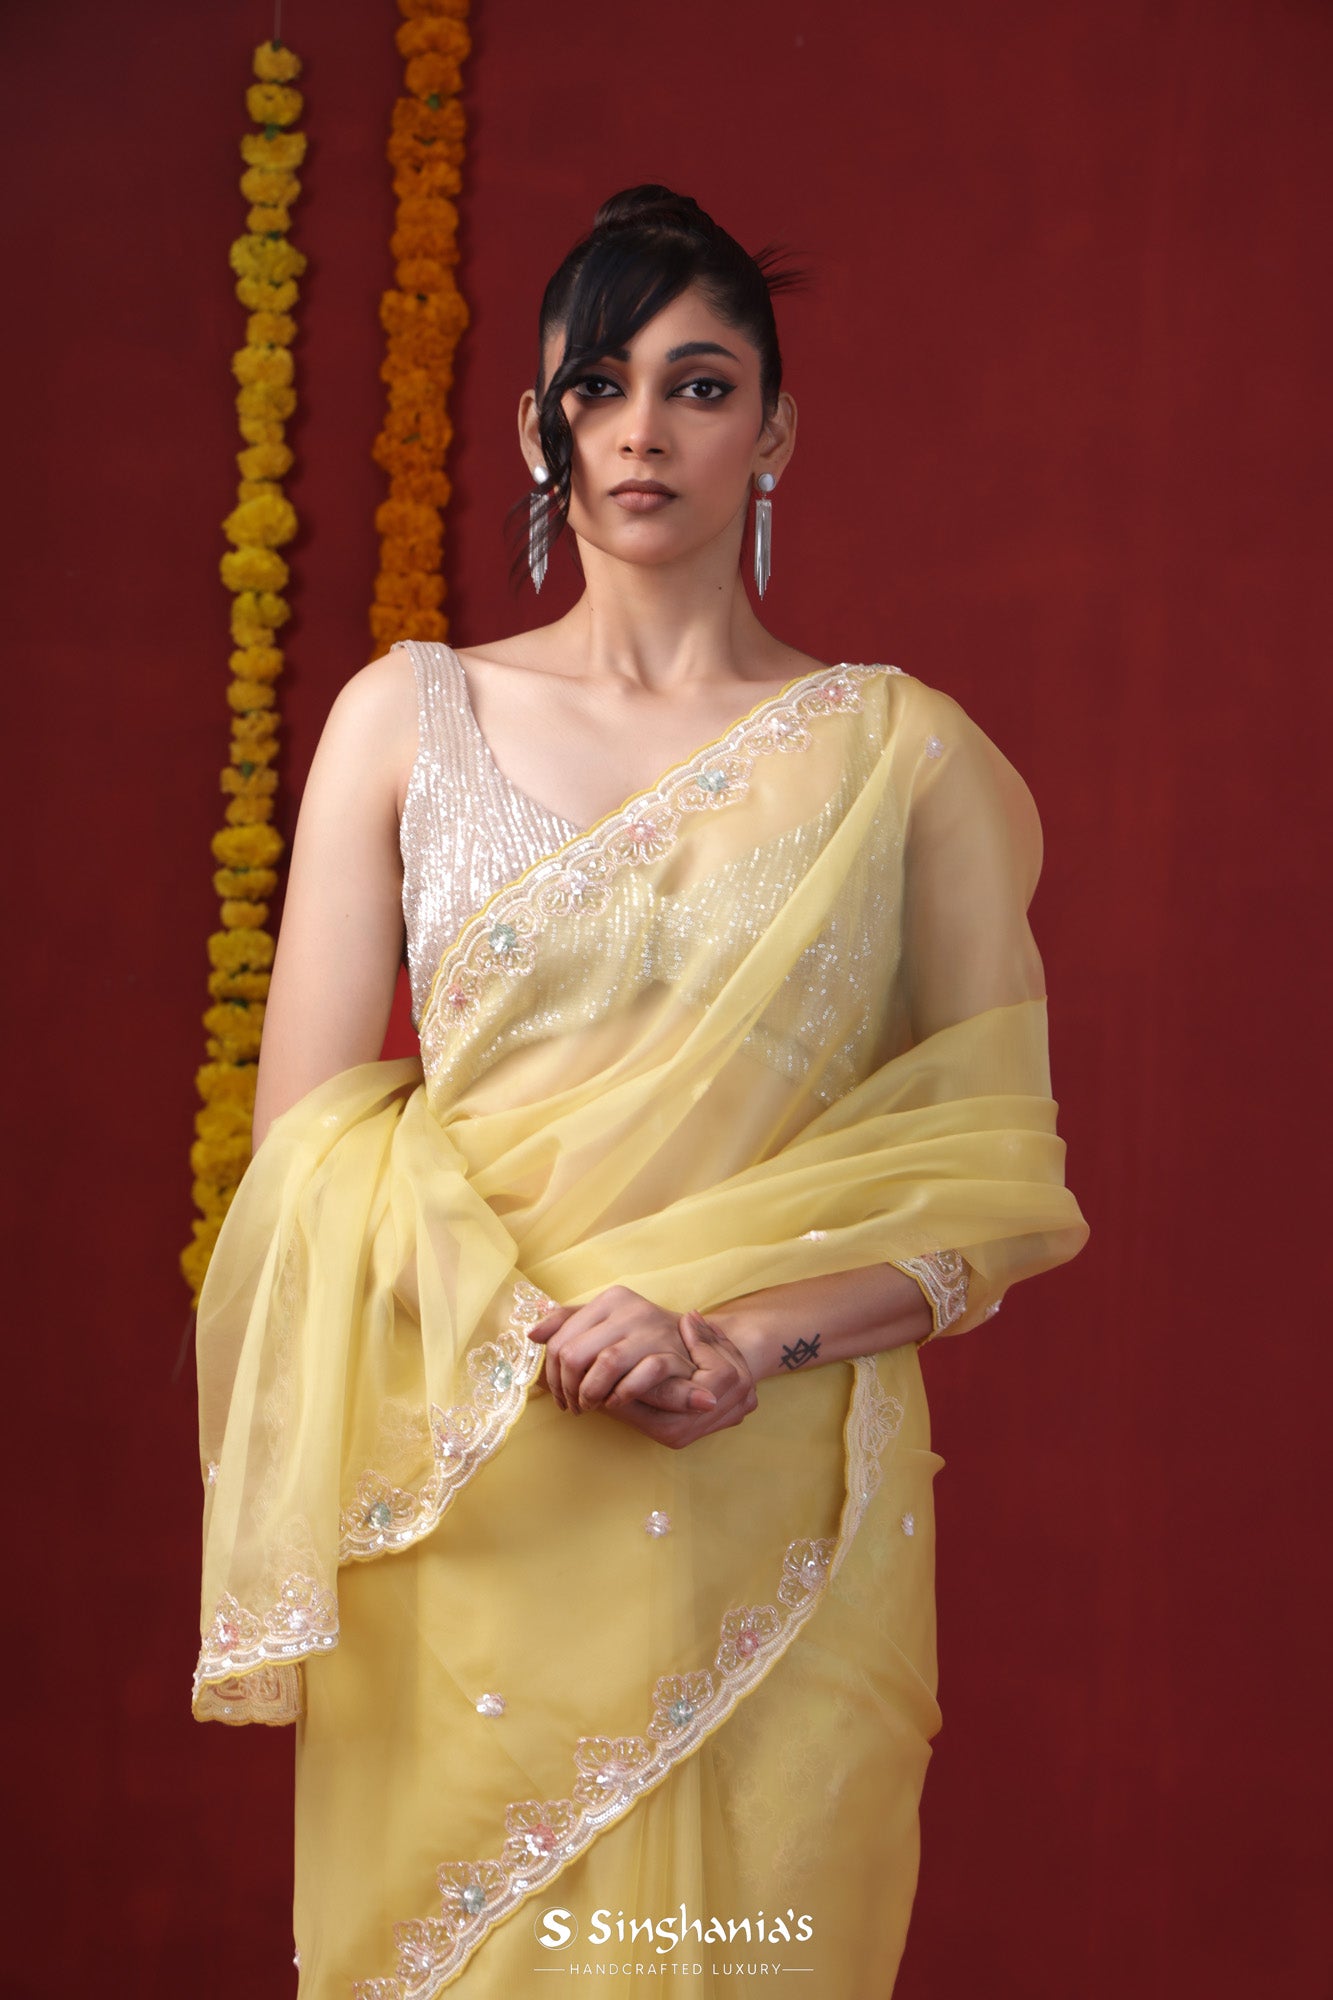 Vanilla Yellow Organza Handcrafted Saree With Floral Embroidery Border